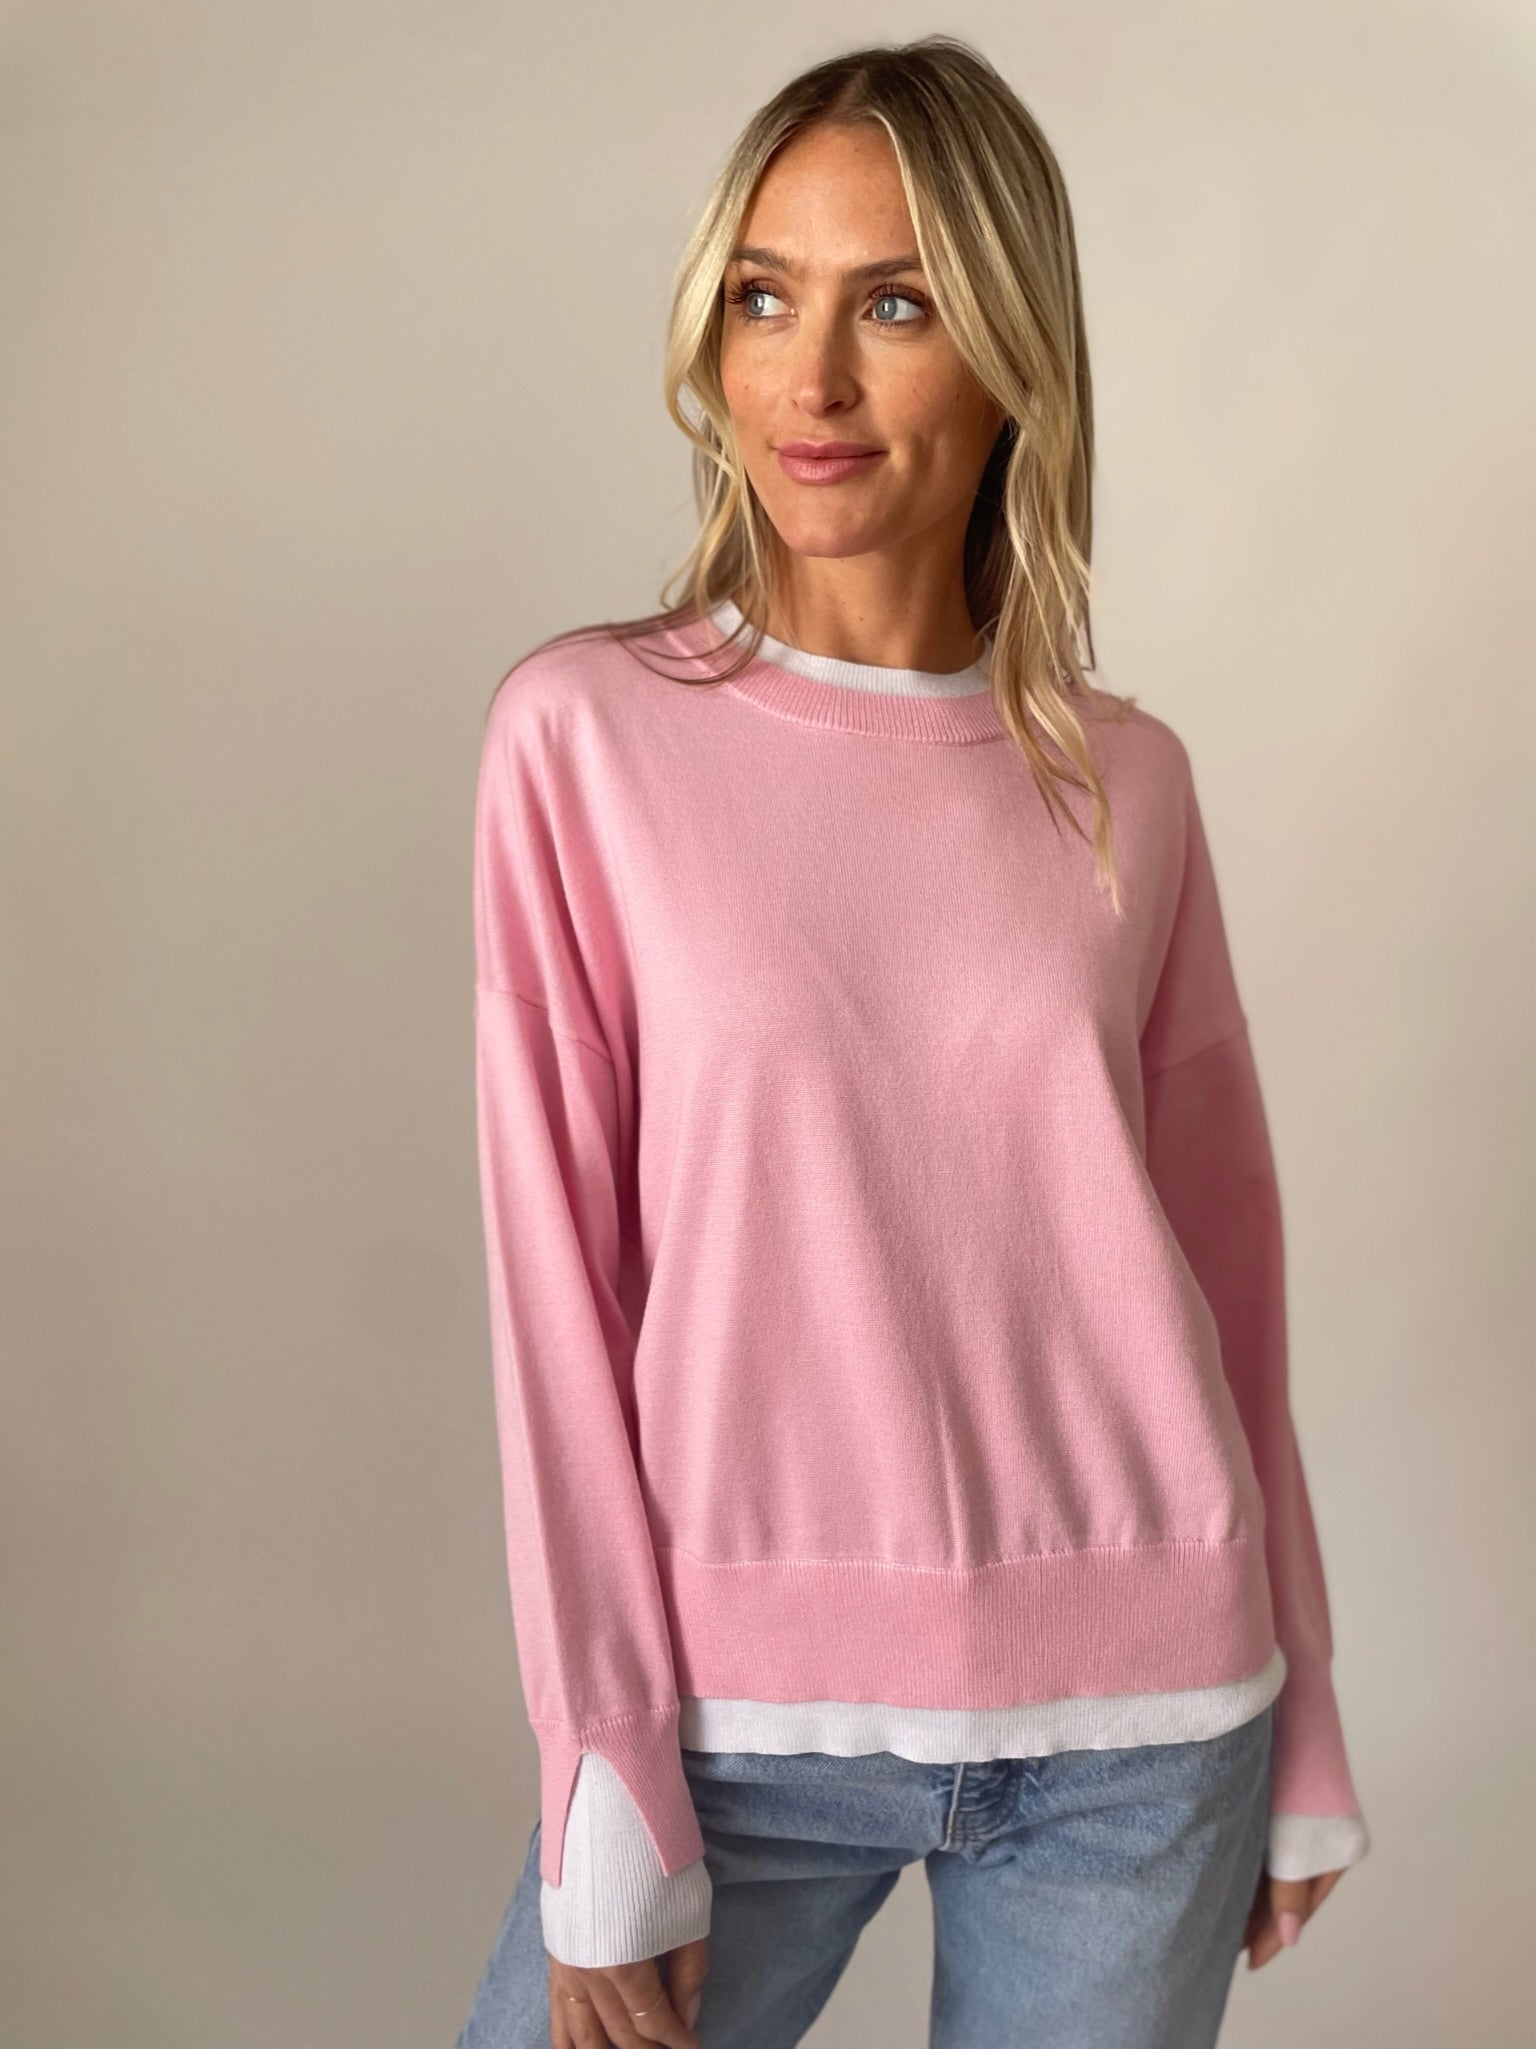 claire top [pink]